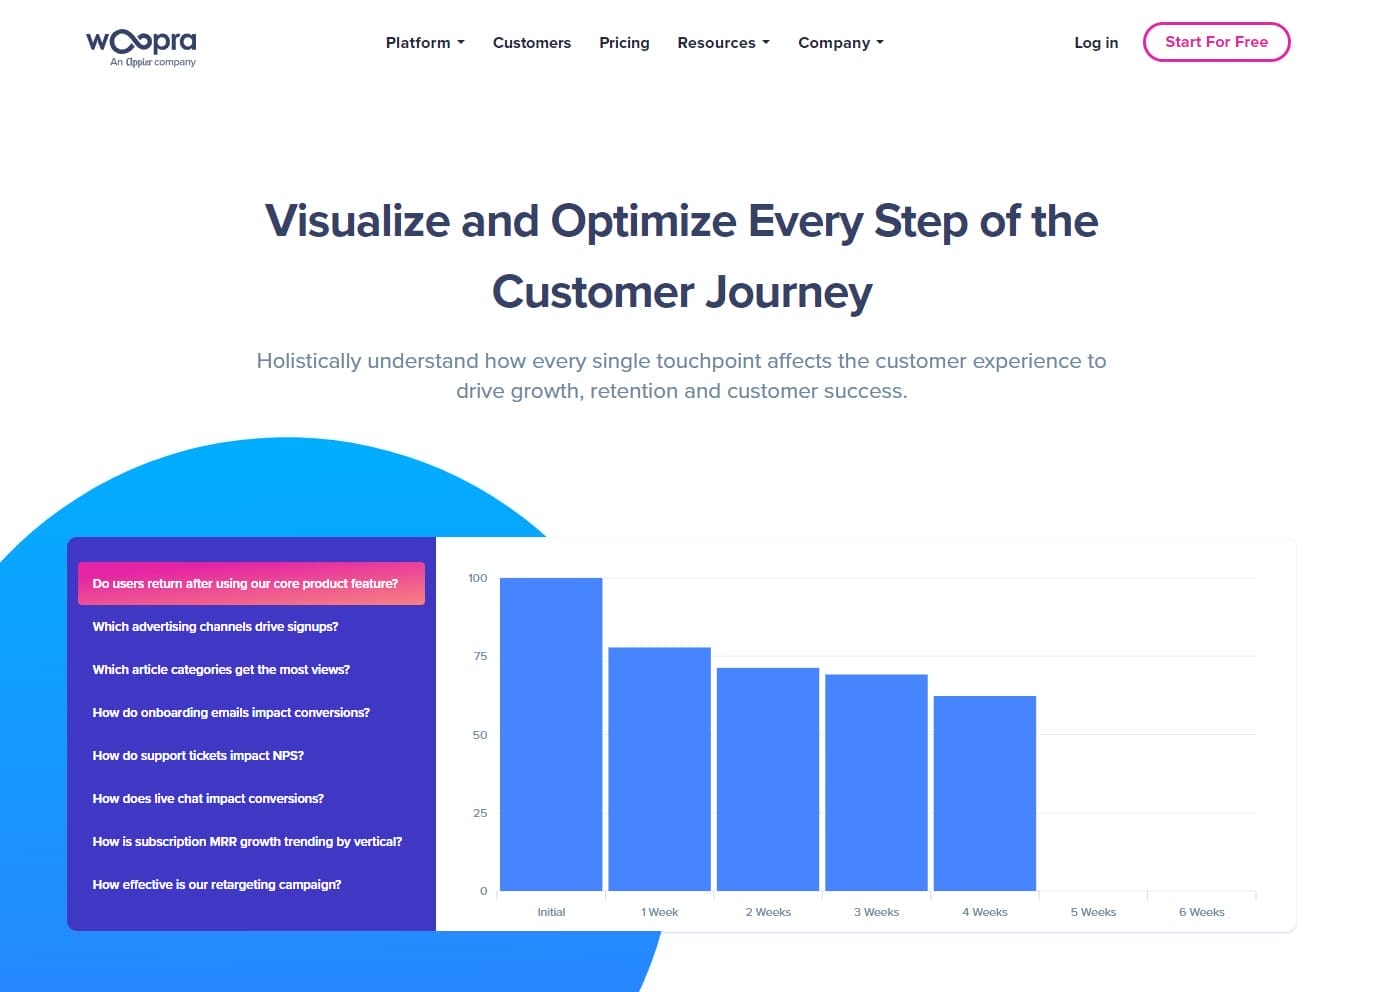 Woopra real-time analytics tool to optimize the customer experience.